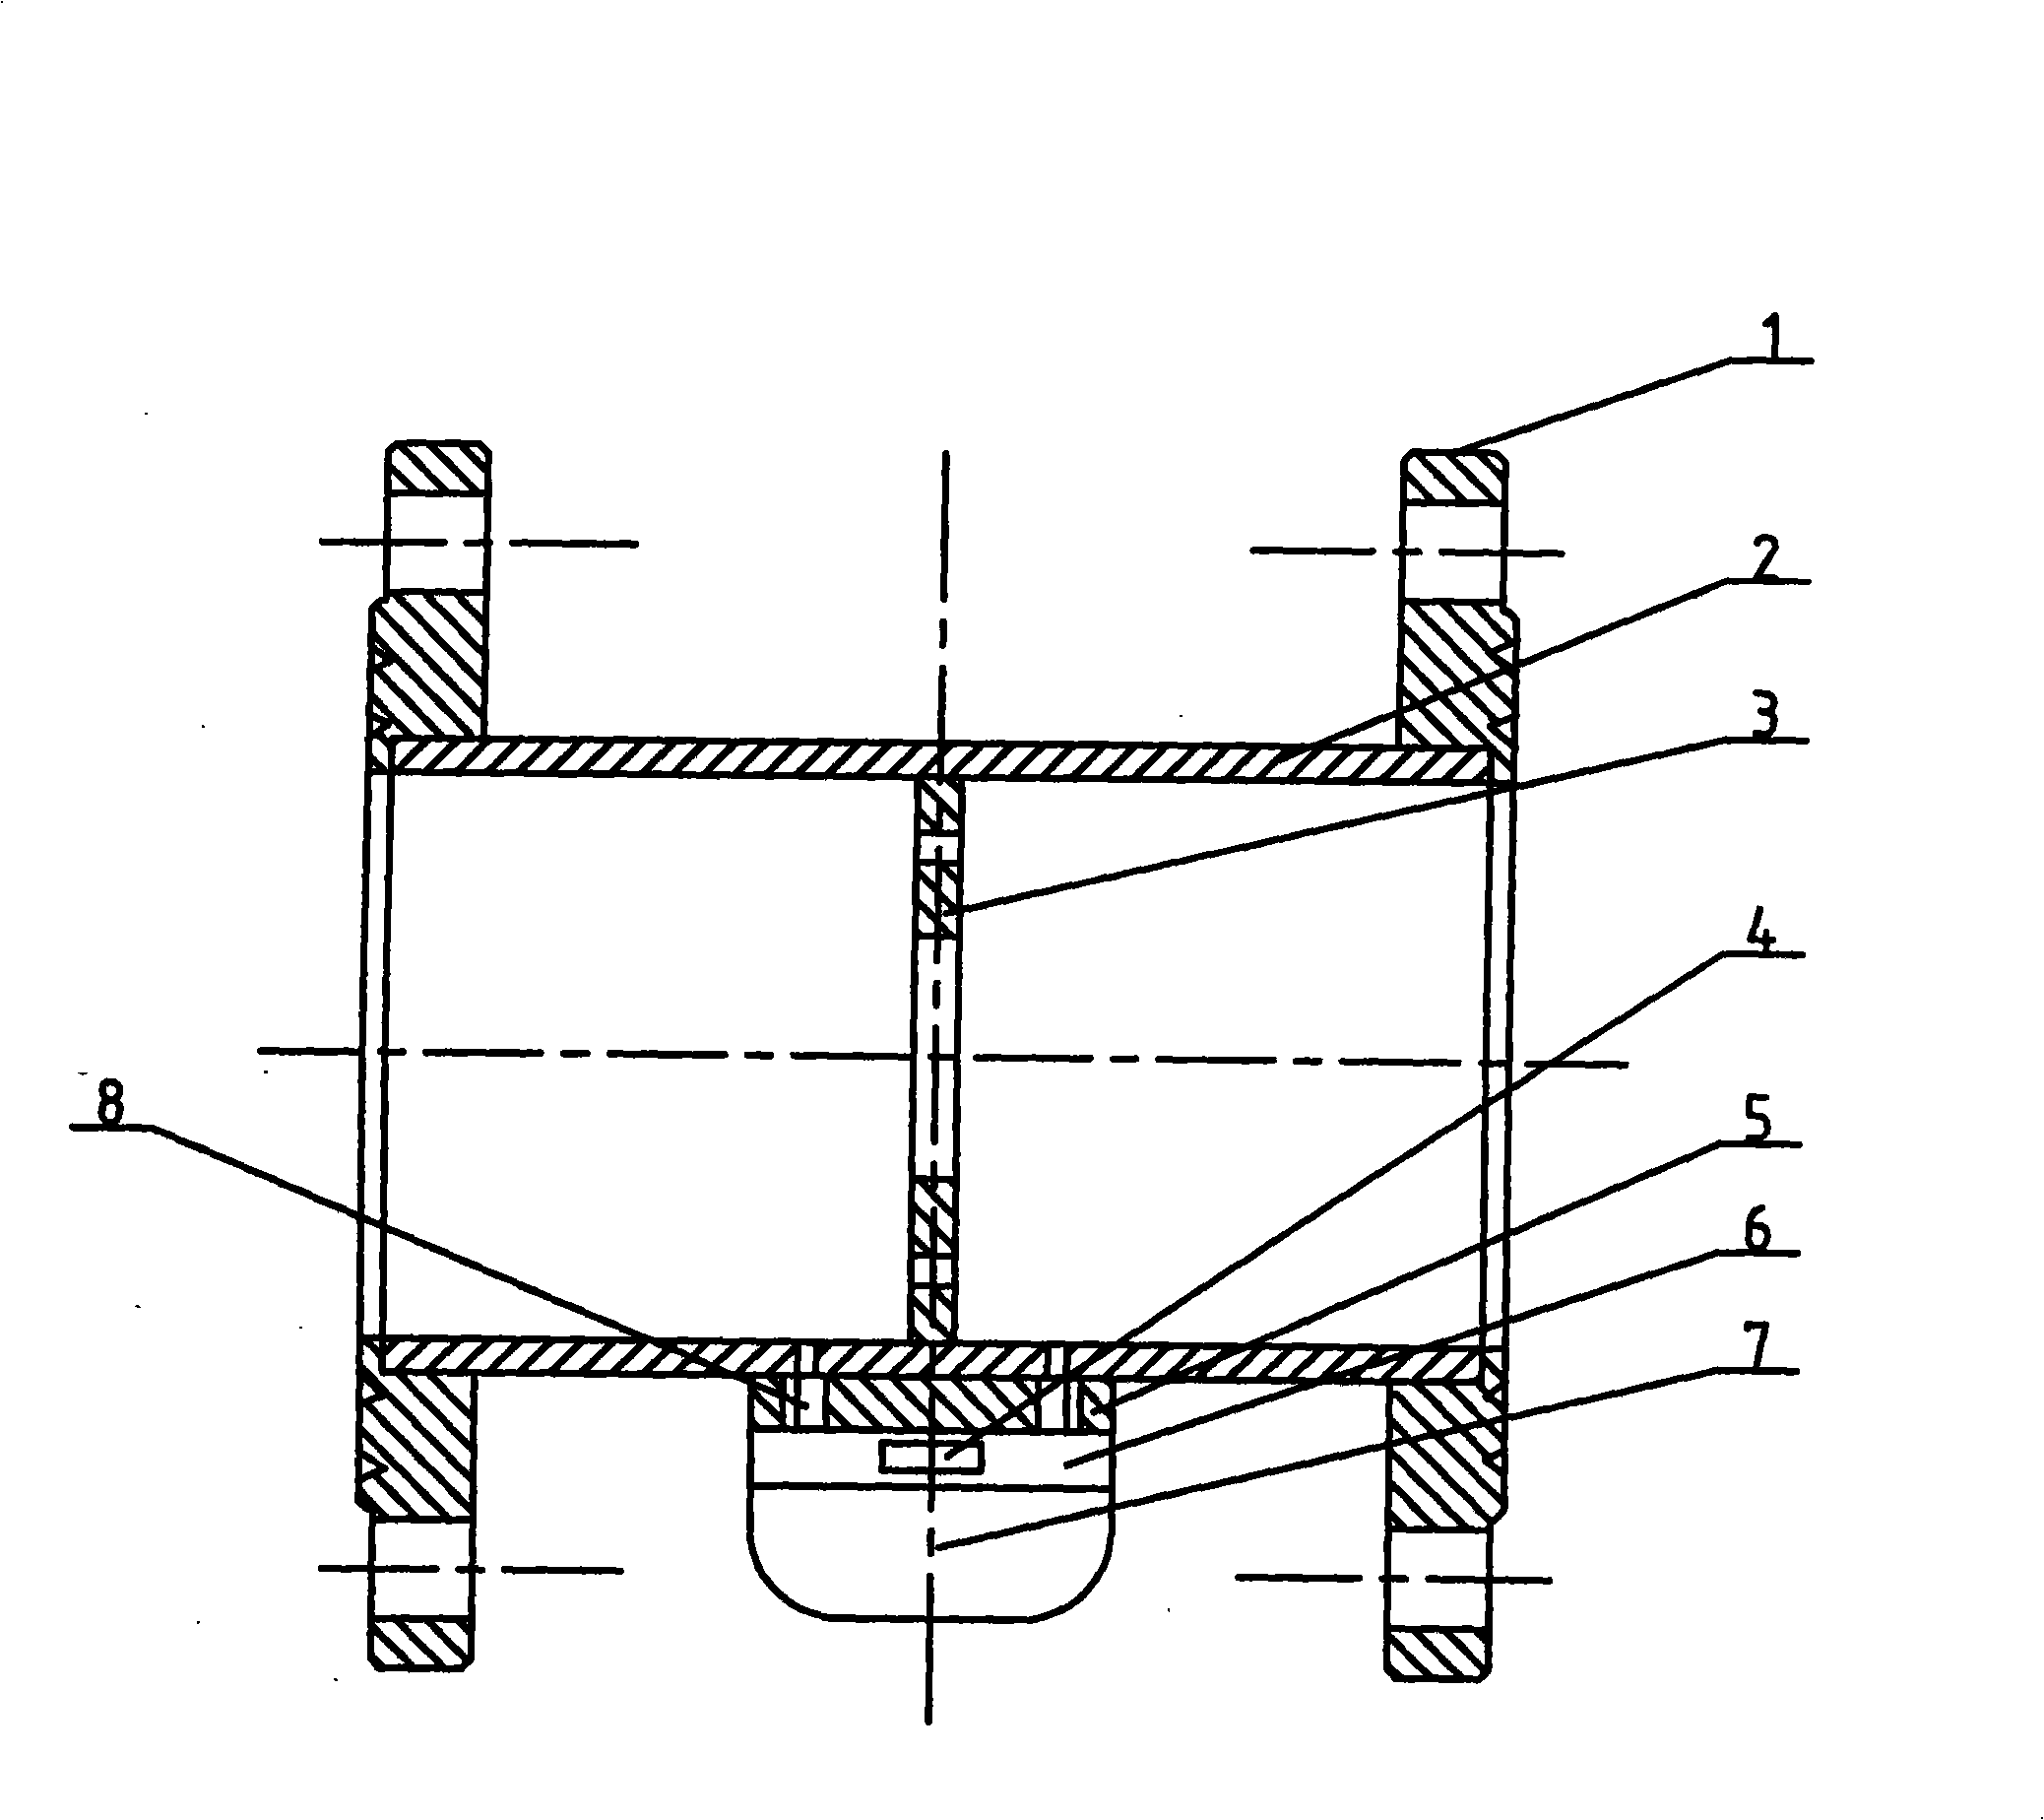 Differential pressure type flow sensor capable of realizing direct pressure tapping and two-way measurement